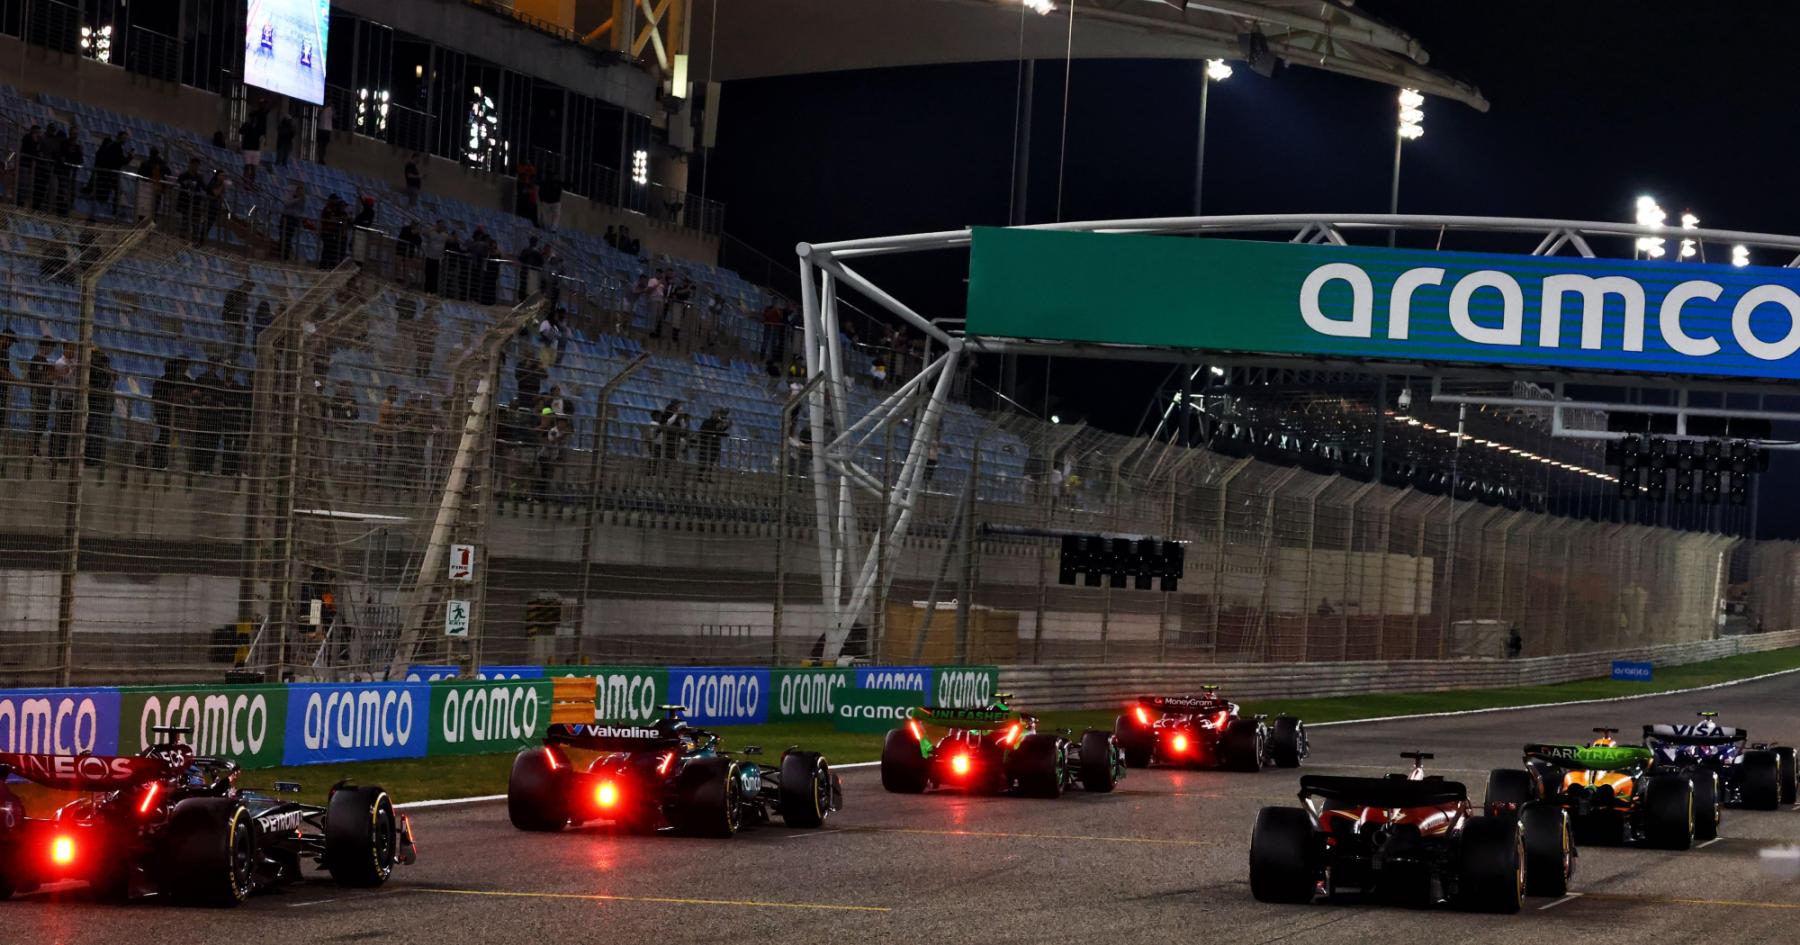 A Race Against Convention: Unconventional Timing for the F1 Bahrain Grand Prix